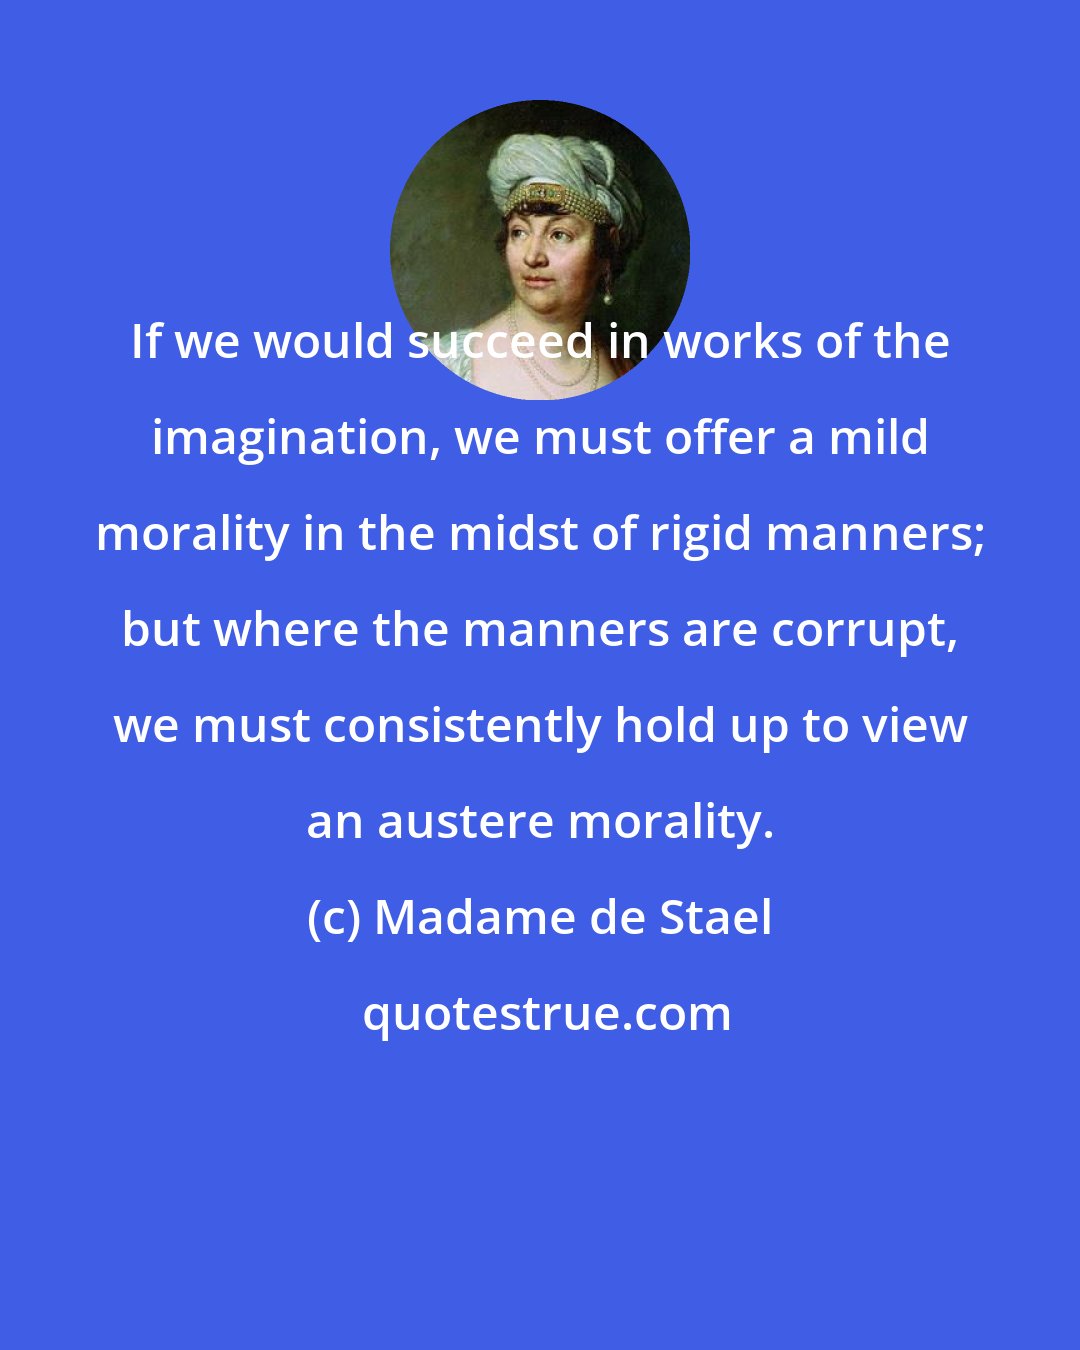 Madame de Stael: If we would succeed in works of the imagination, we must offer a mild morality in the midst of rigid manners; but where the manners are corrupt, we must consistently hold up to view an austere morality.